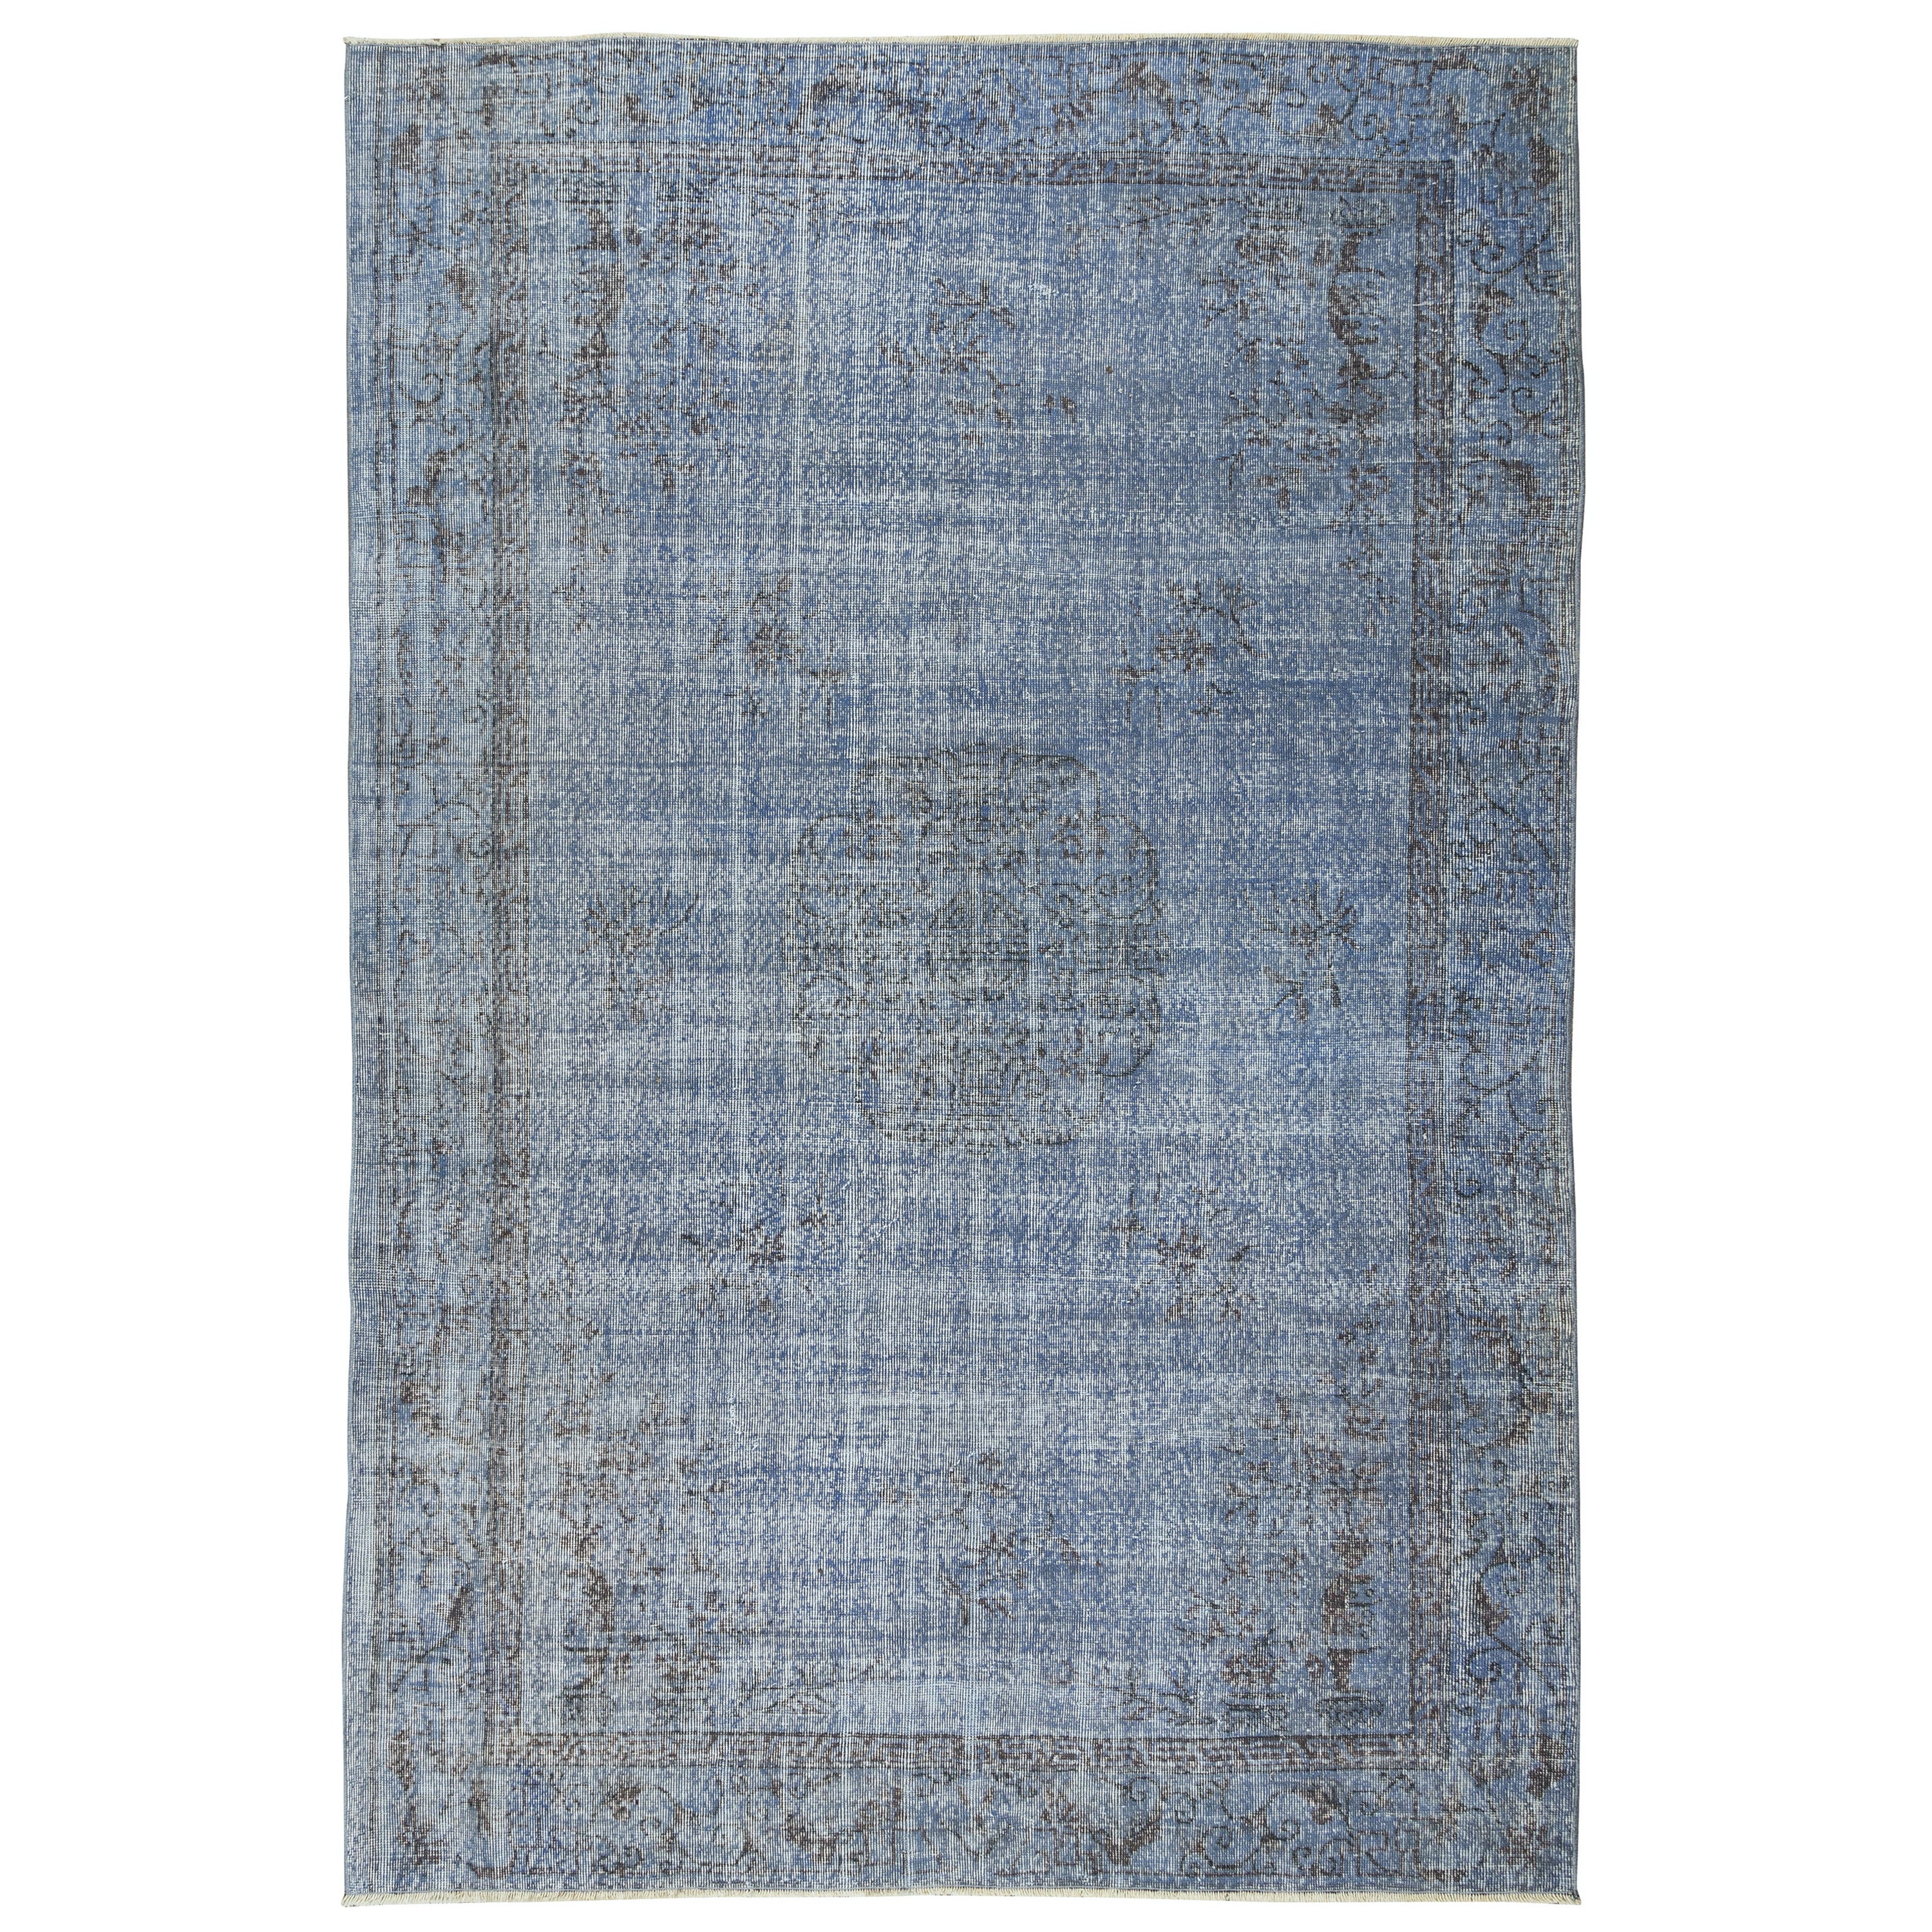 6.5x10 Ft Handmade Turkish Wool Area Rug in Blue with Art Deco Chinese Design For Sale